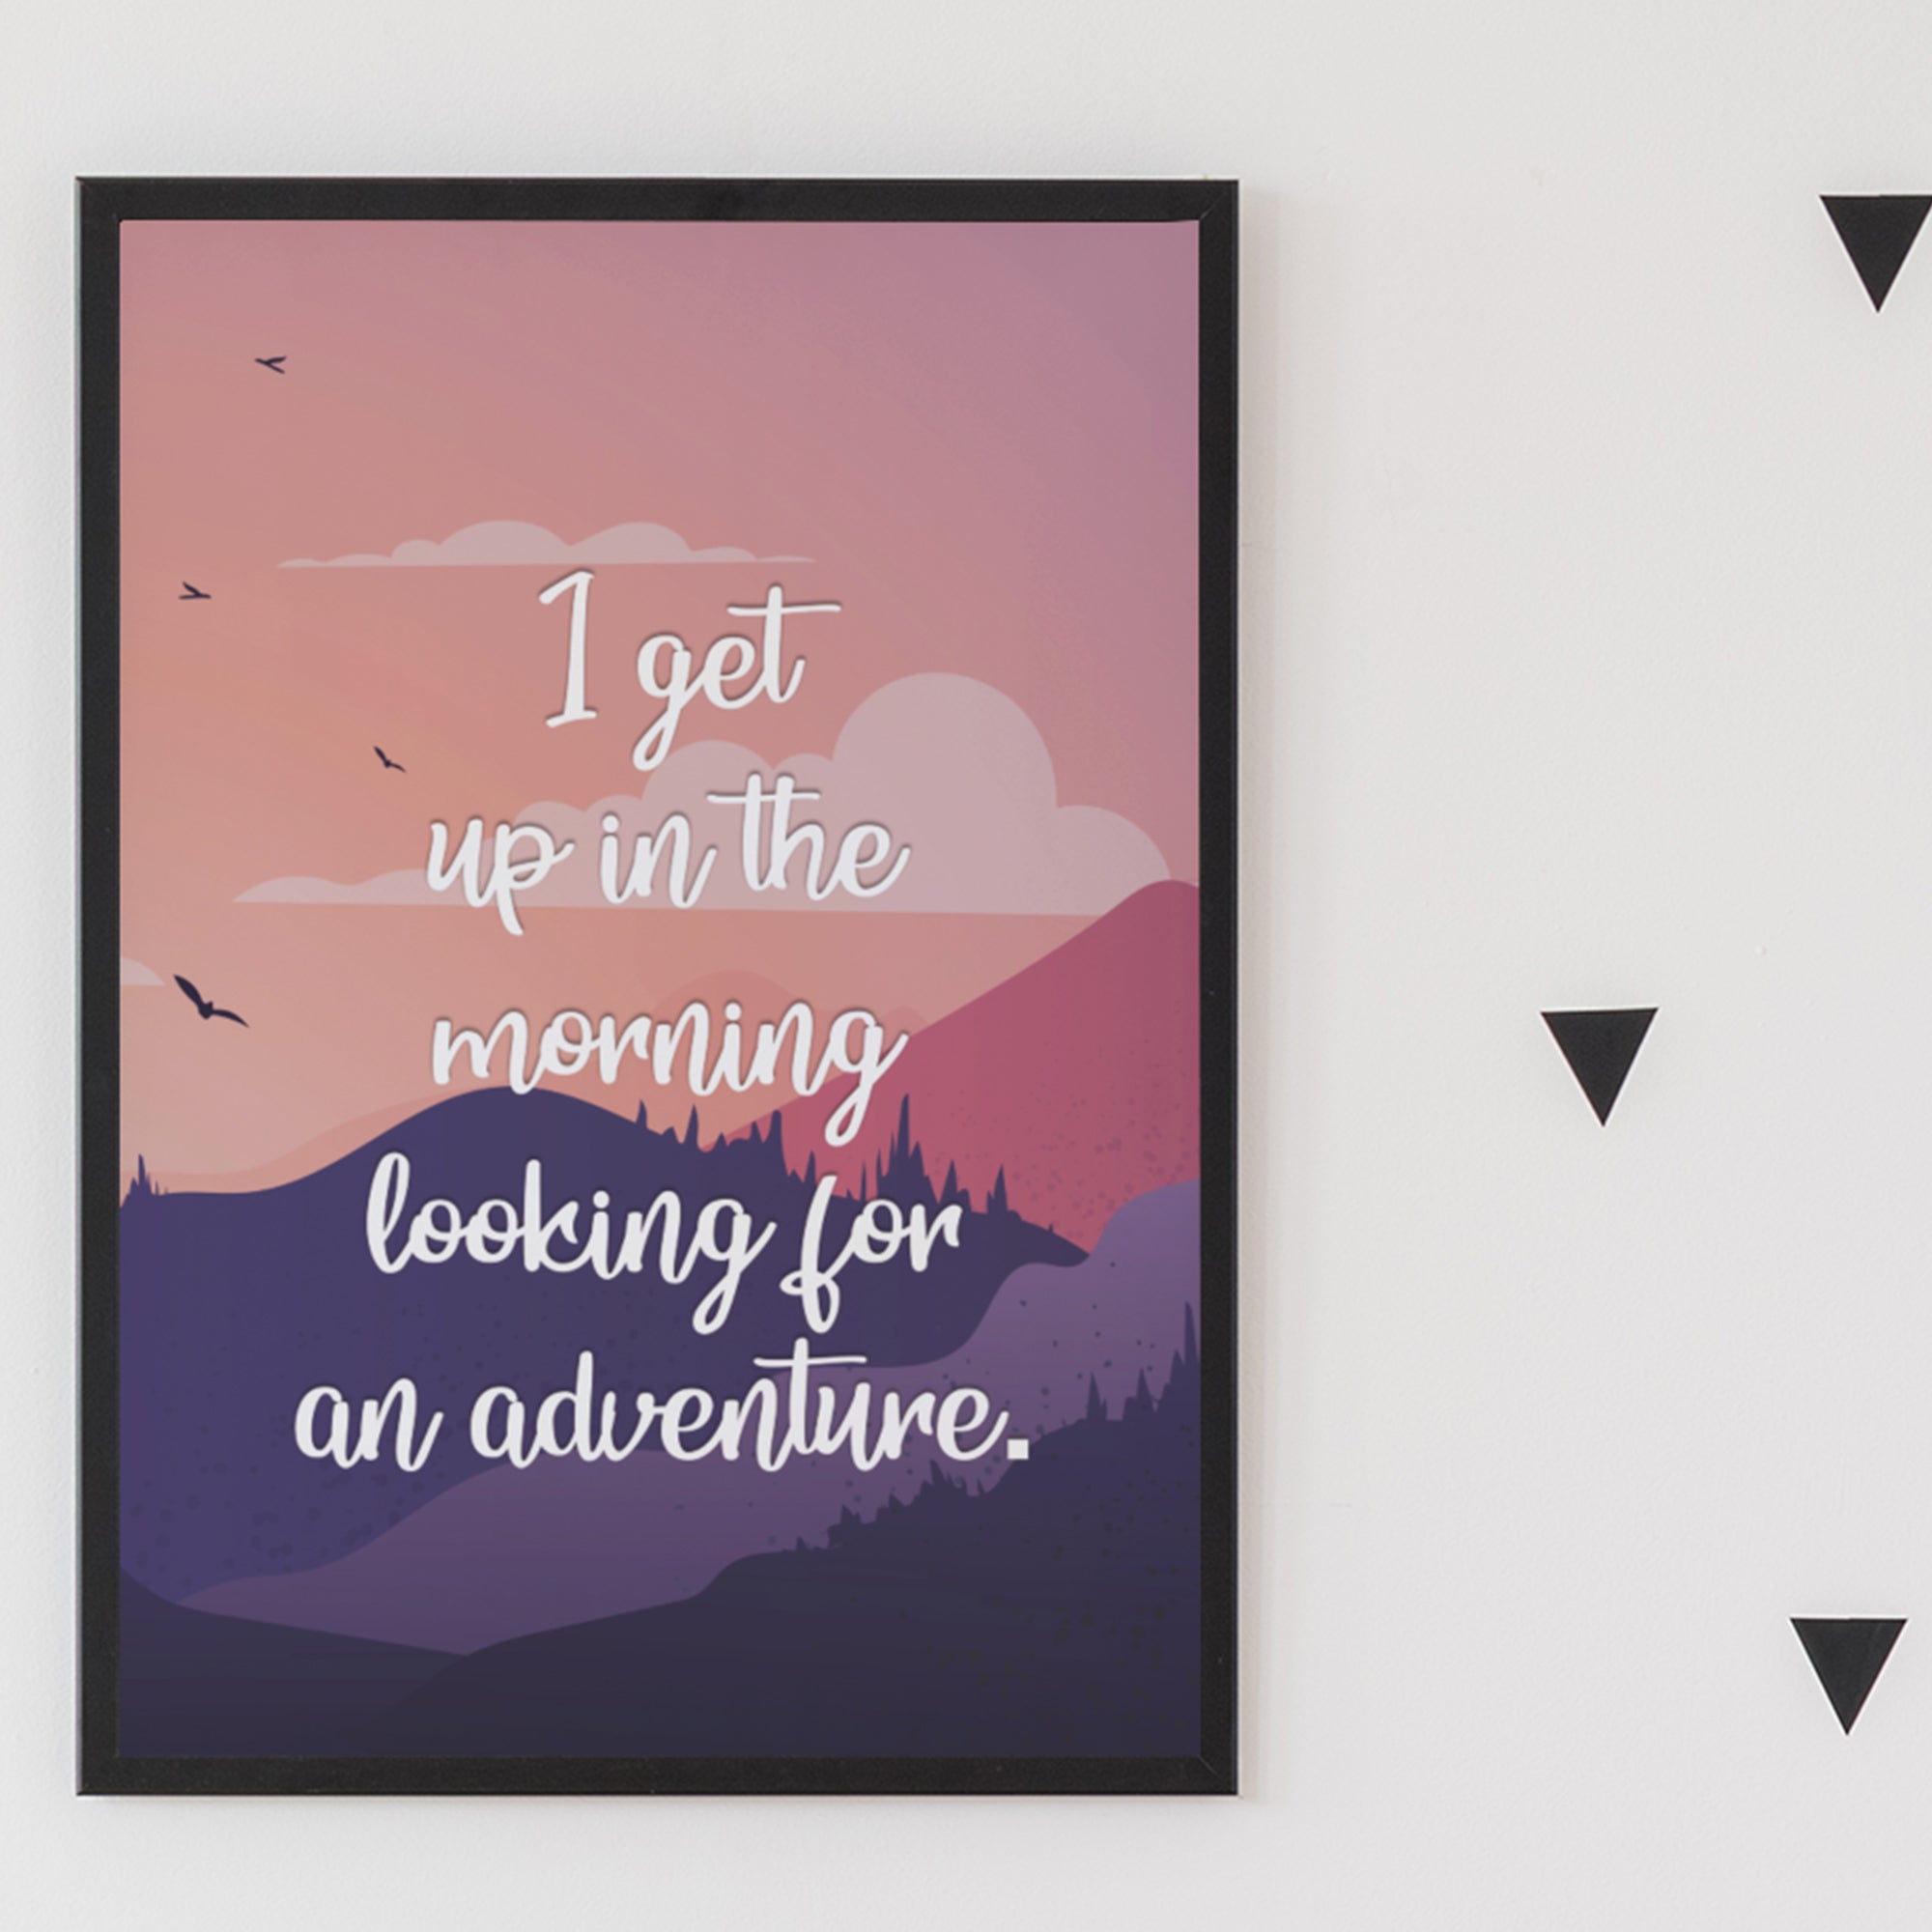 I Get Up In The Morning Looking For Adventure Art Print